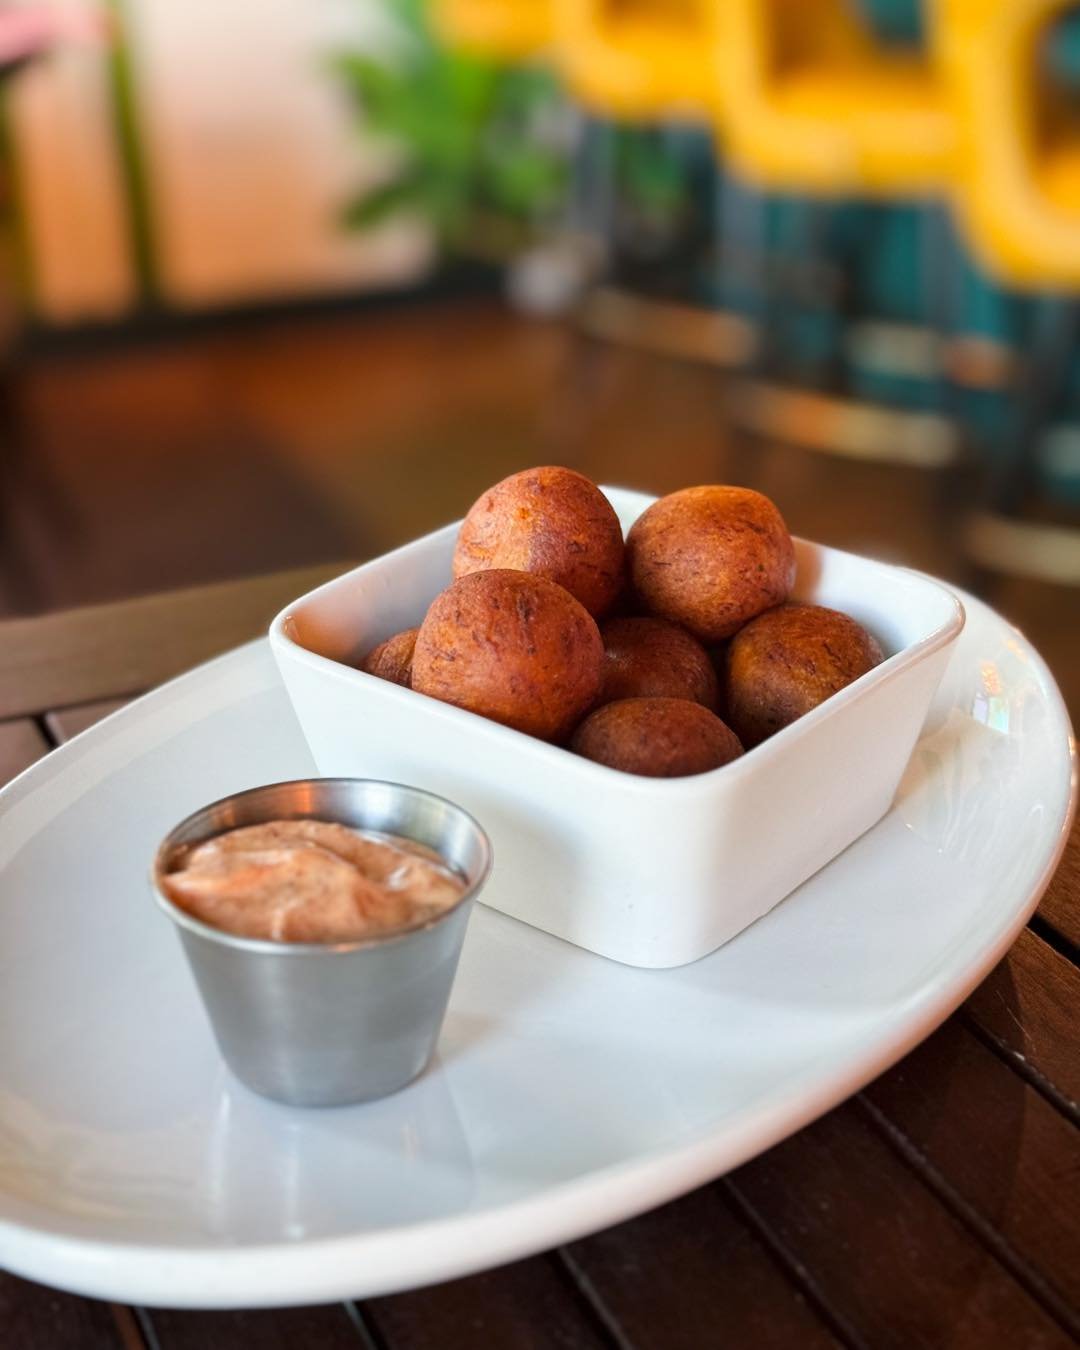 Savor our weekly feature: Fried Picadillo Stuffed Madero Balls, served with zesty aioli. Tag your crew and join us at Pineapple Ink Tavern! 🍴🔥 

#WeeklyFeature #FoodieDelight #PineappleInkTavern